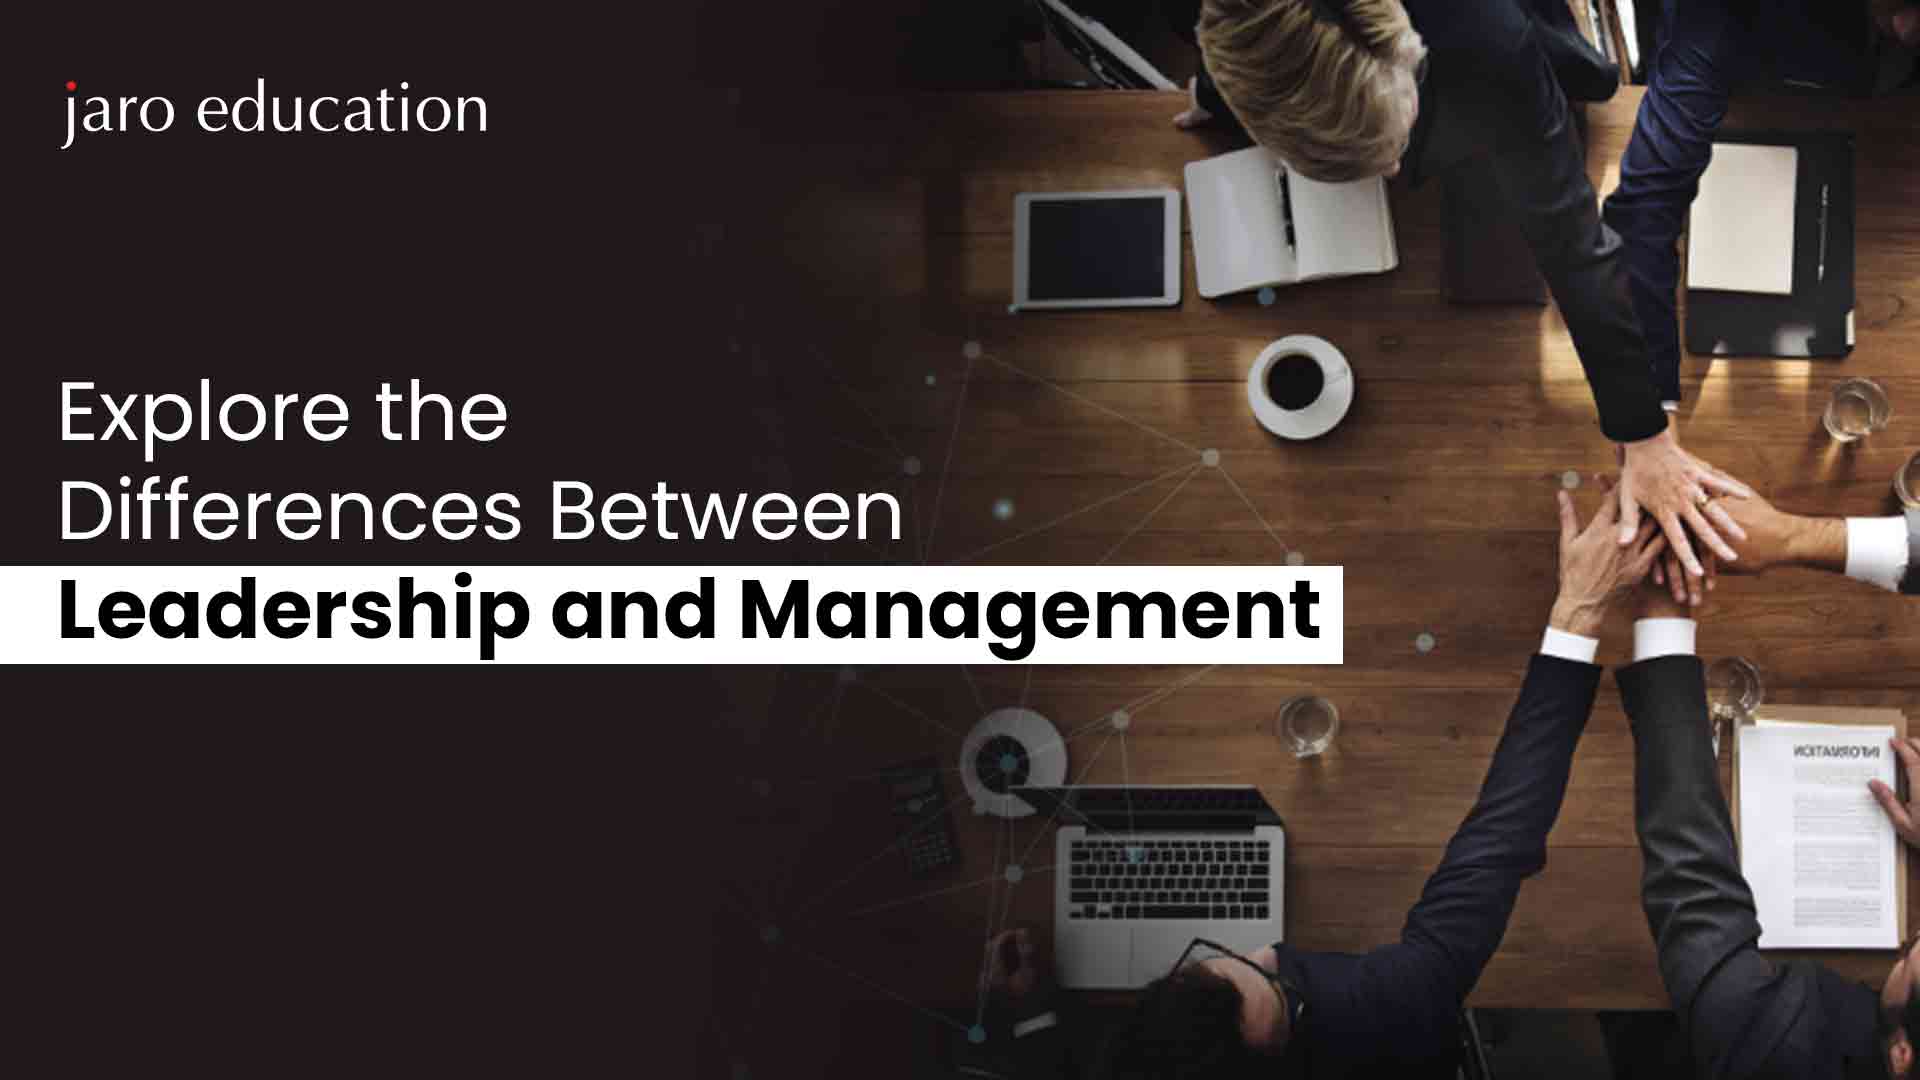 Explore the Differences Between Leadership and Management